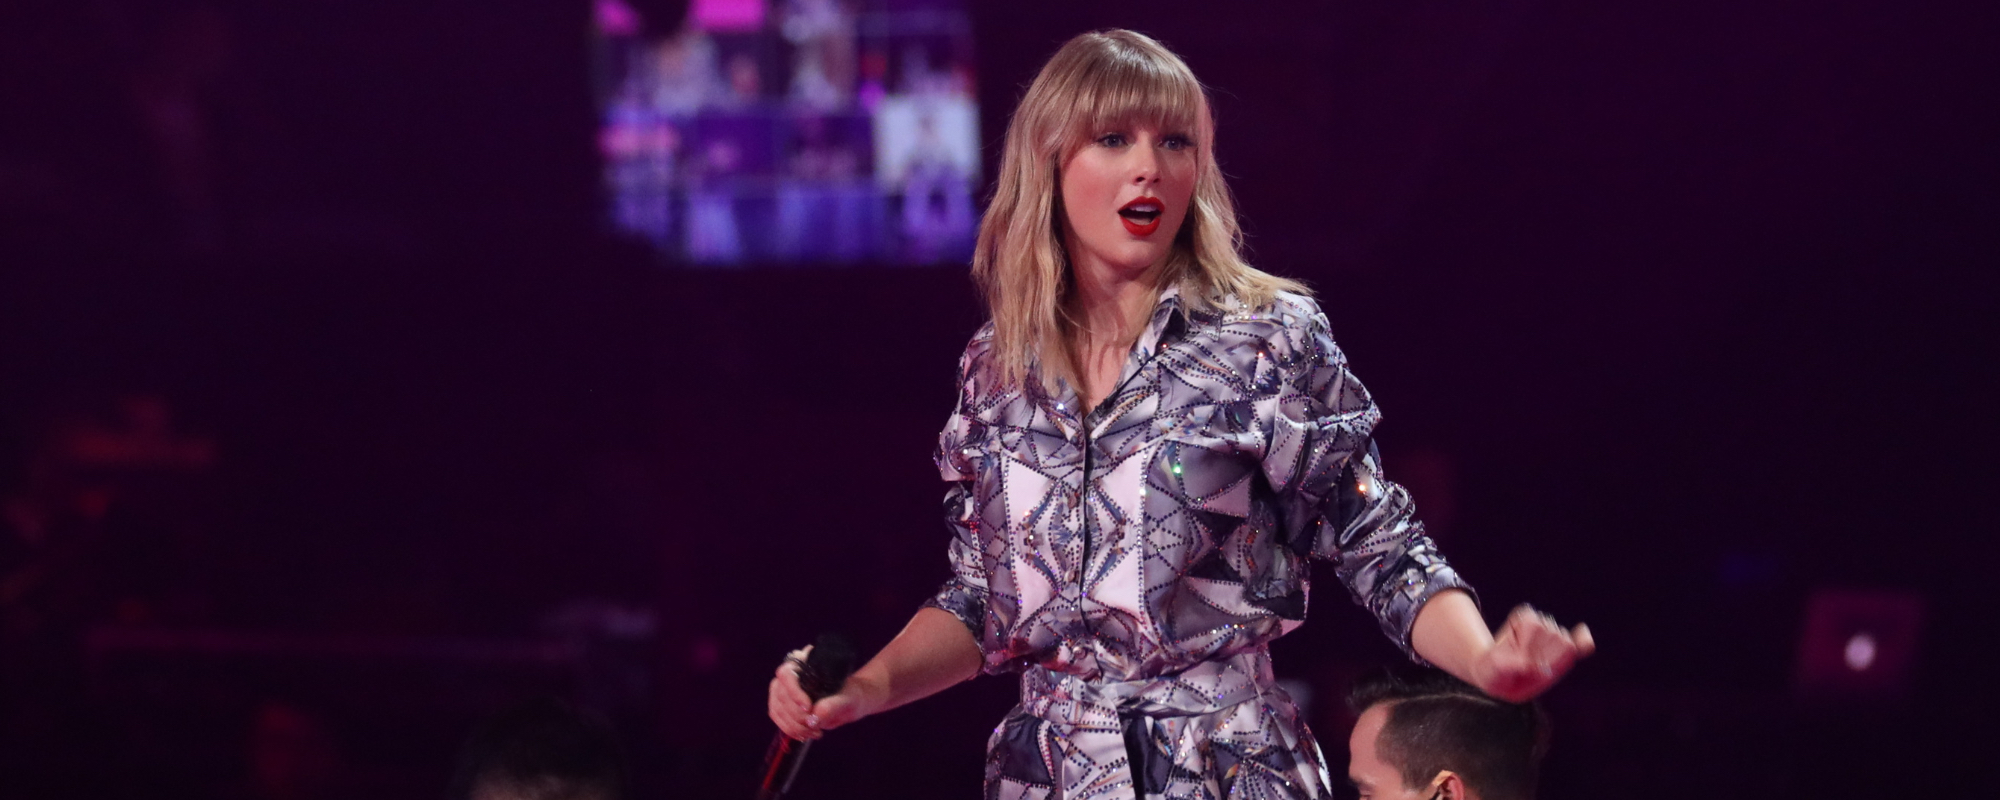 The Week in Review: Taylor Swift, VMAs, *NSYNC, Maren Morris, and More